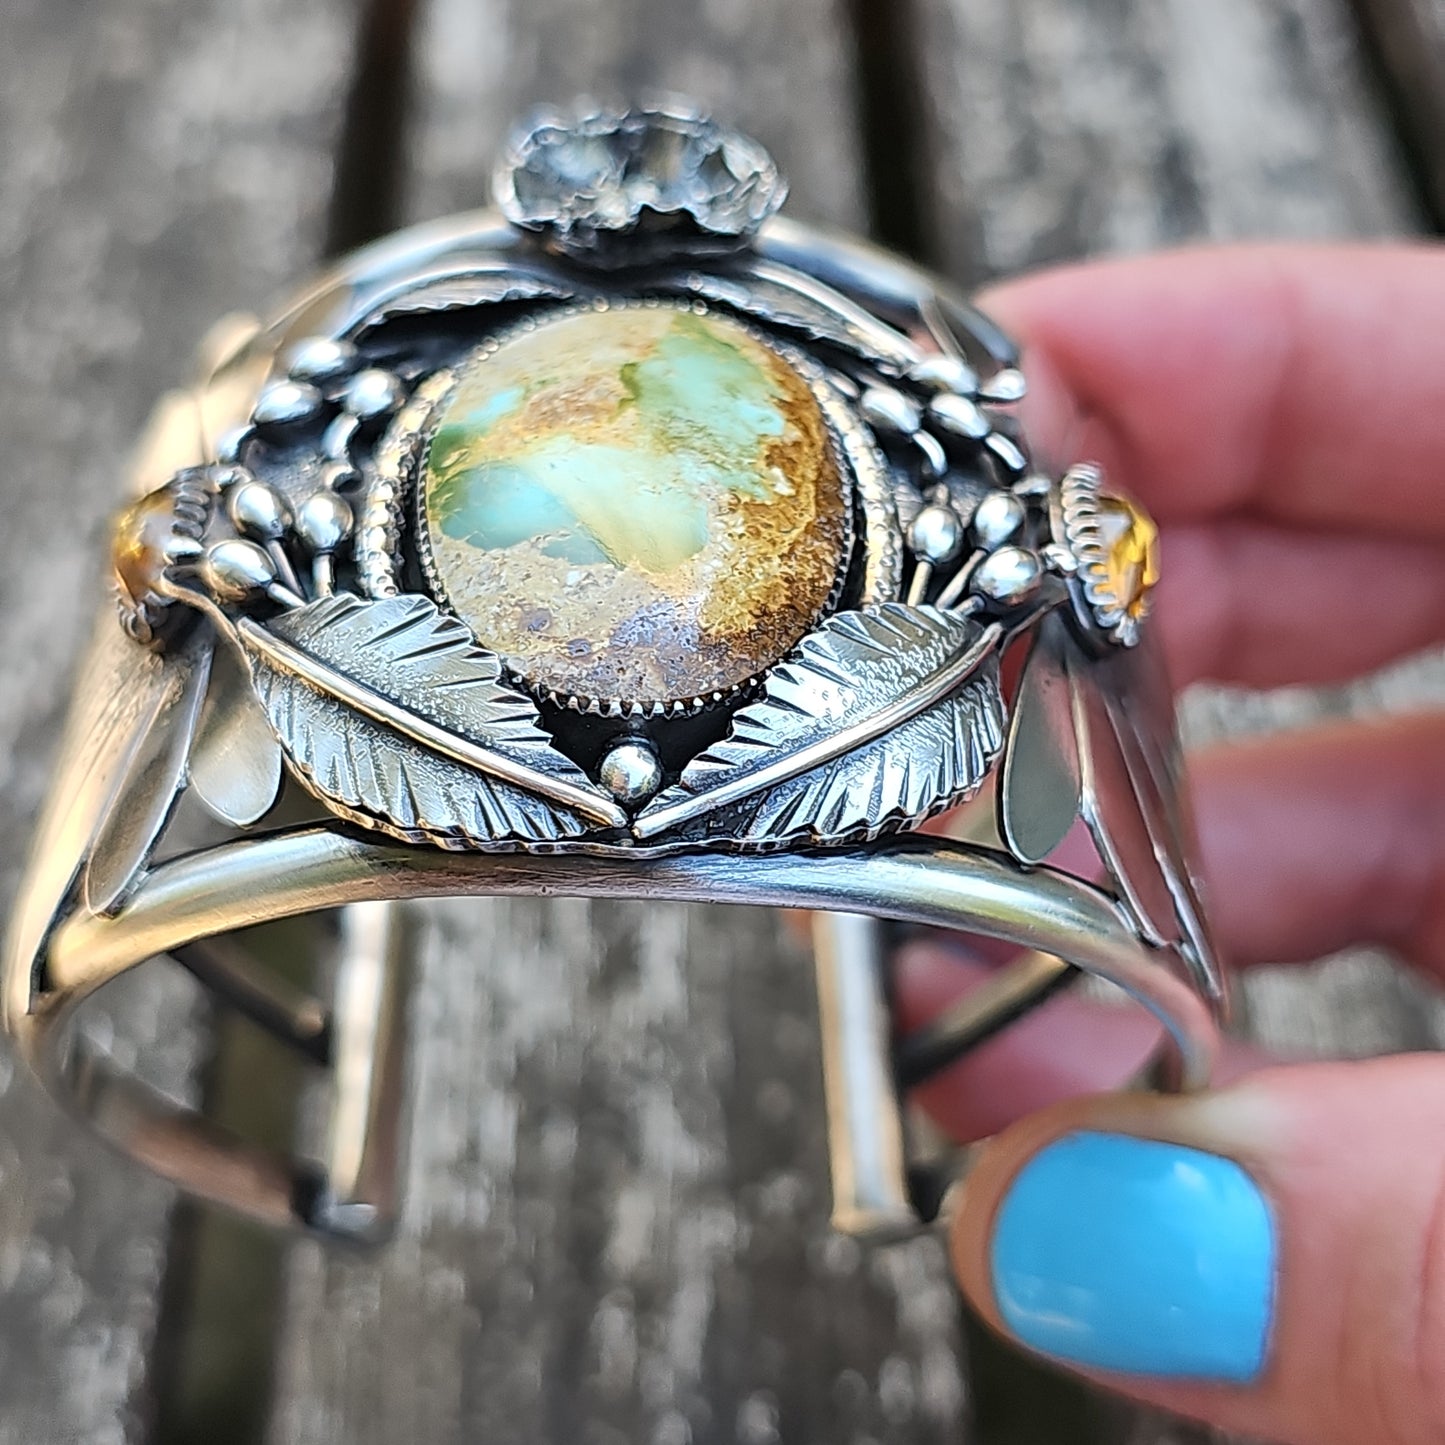 XX//WILD FLOWER WOMAN Statement Cuff Bracelet - Stone Mountain Ribbon Turquoise and Citrine in All Sterling Silver size M/L